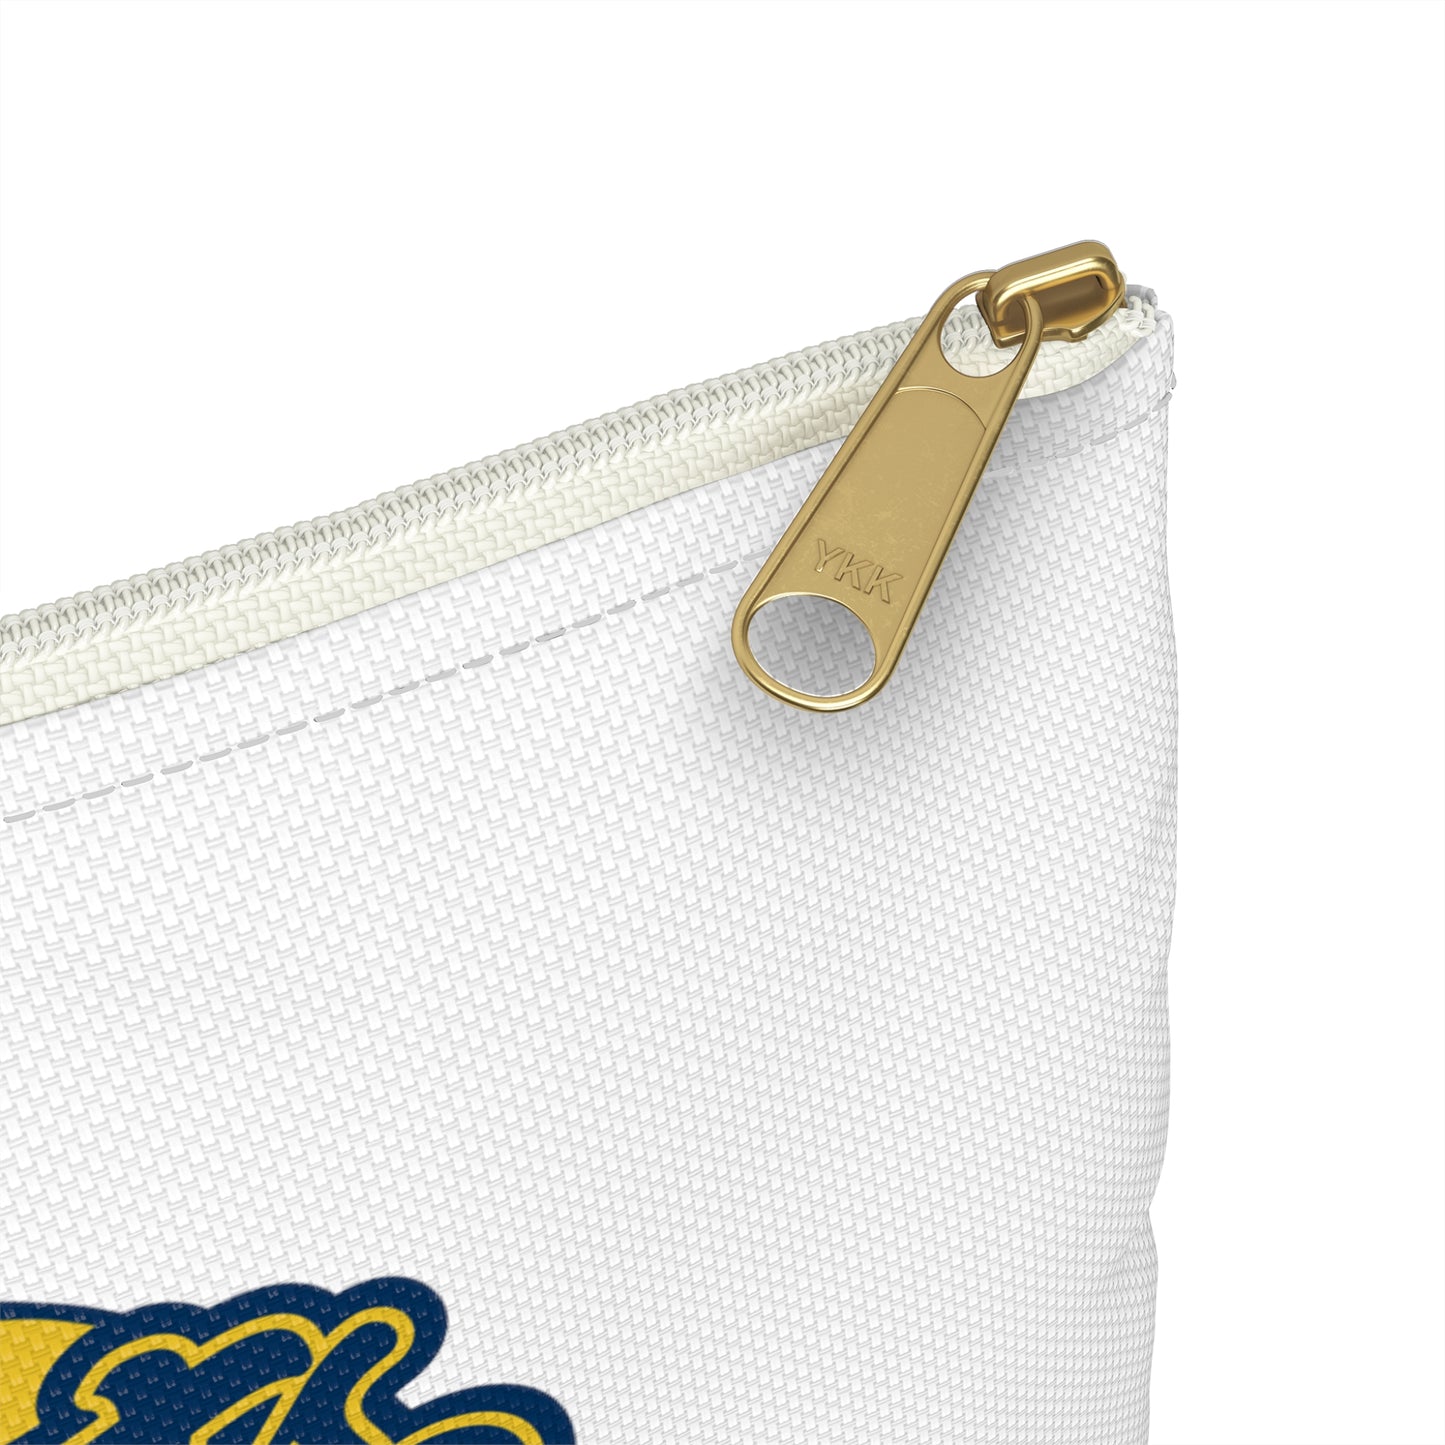 Personalized Oxford Pick-Your-Sport Accessory Pouch